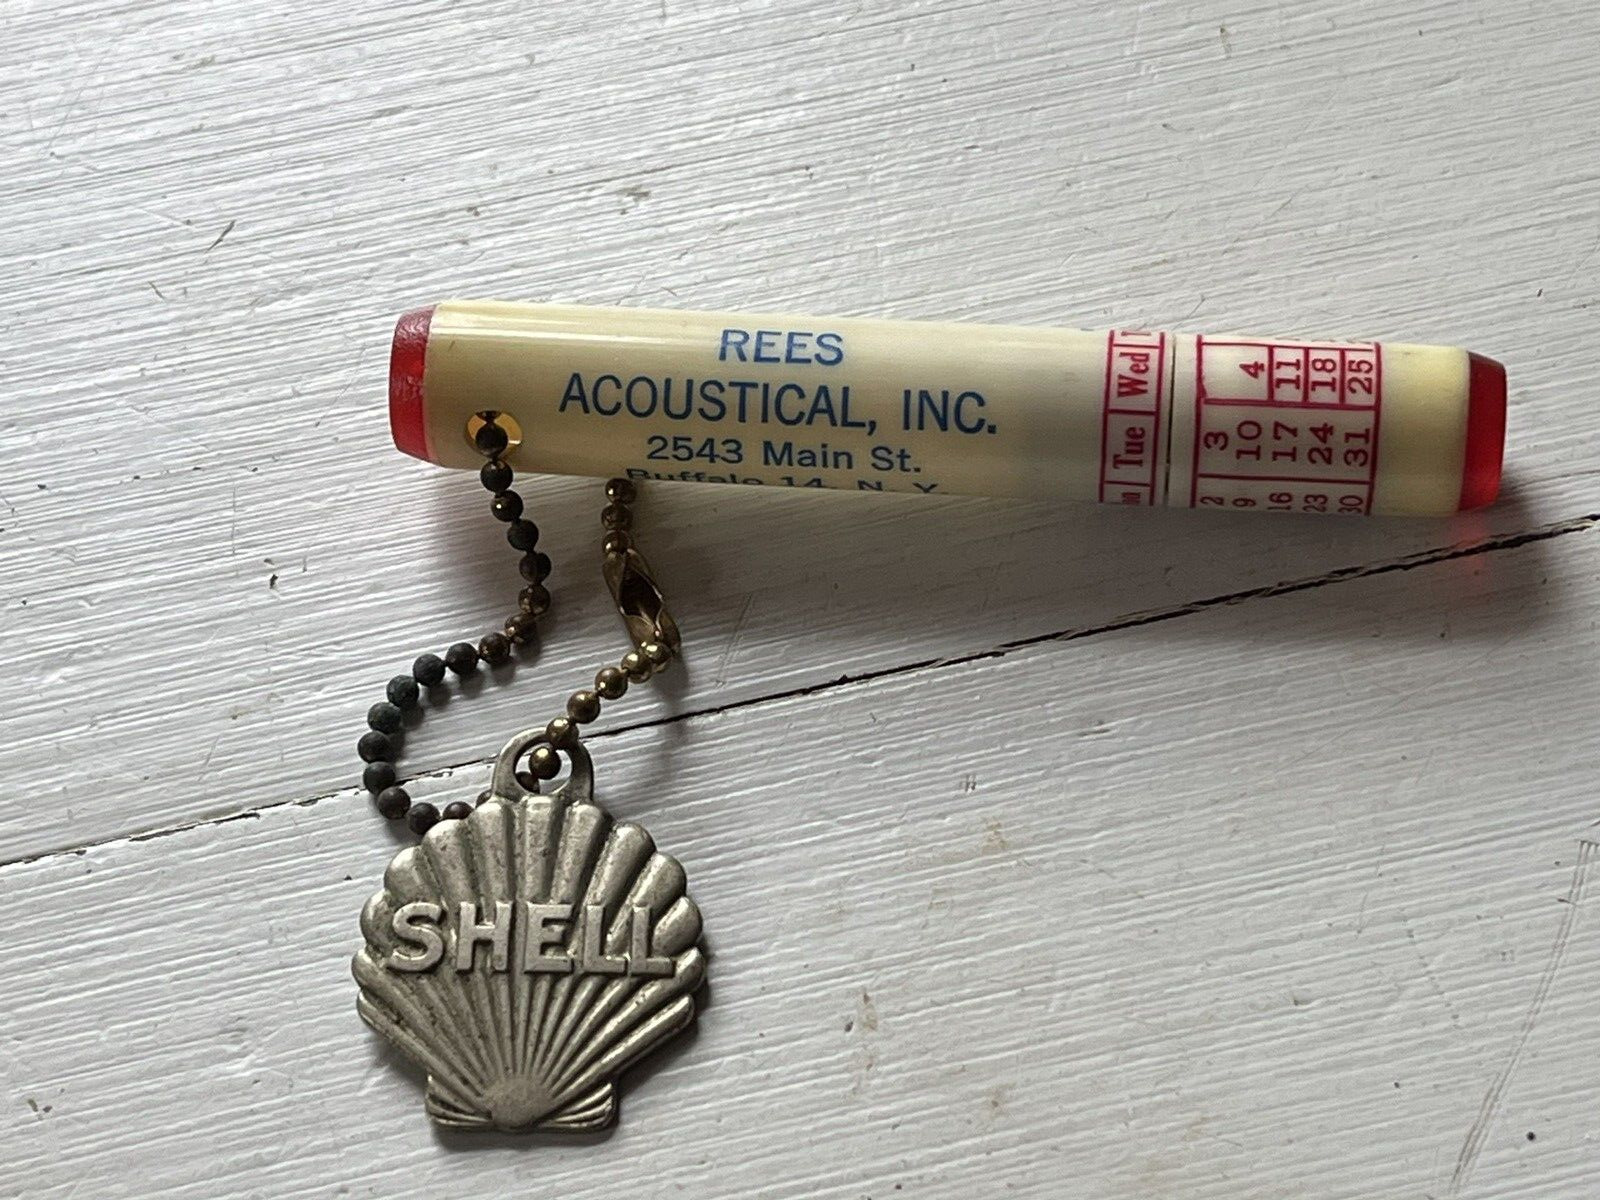 Shell Oil Co. Finder Mail NYC Key Fob Rees Acoustical Advert Perpetual Calendar